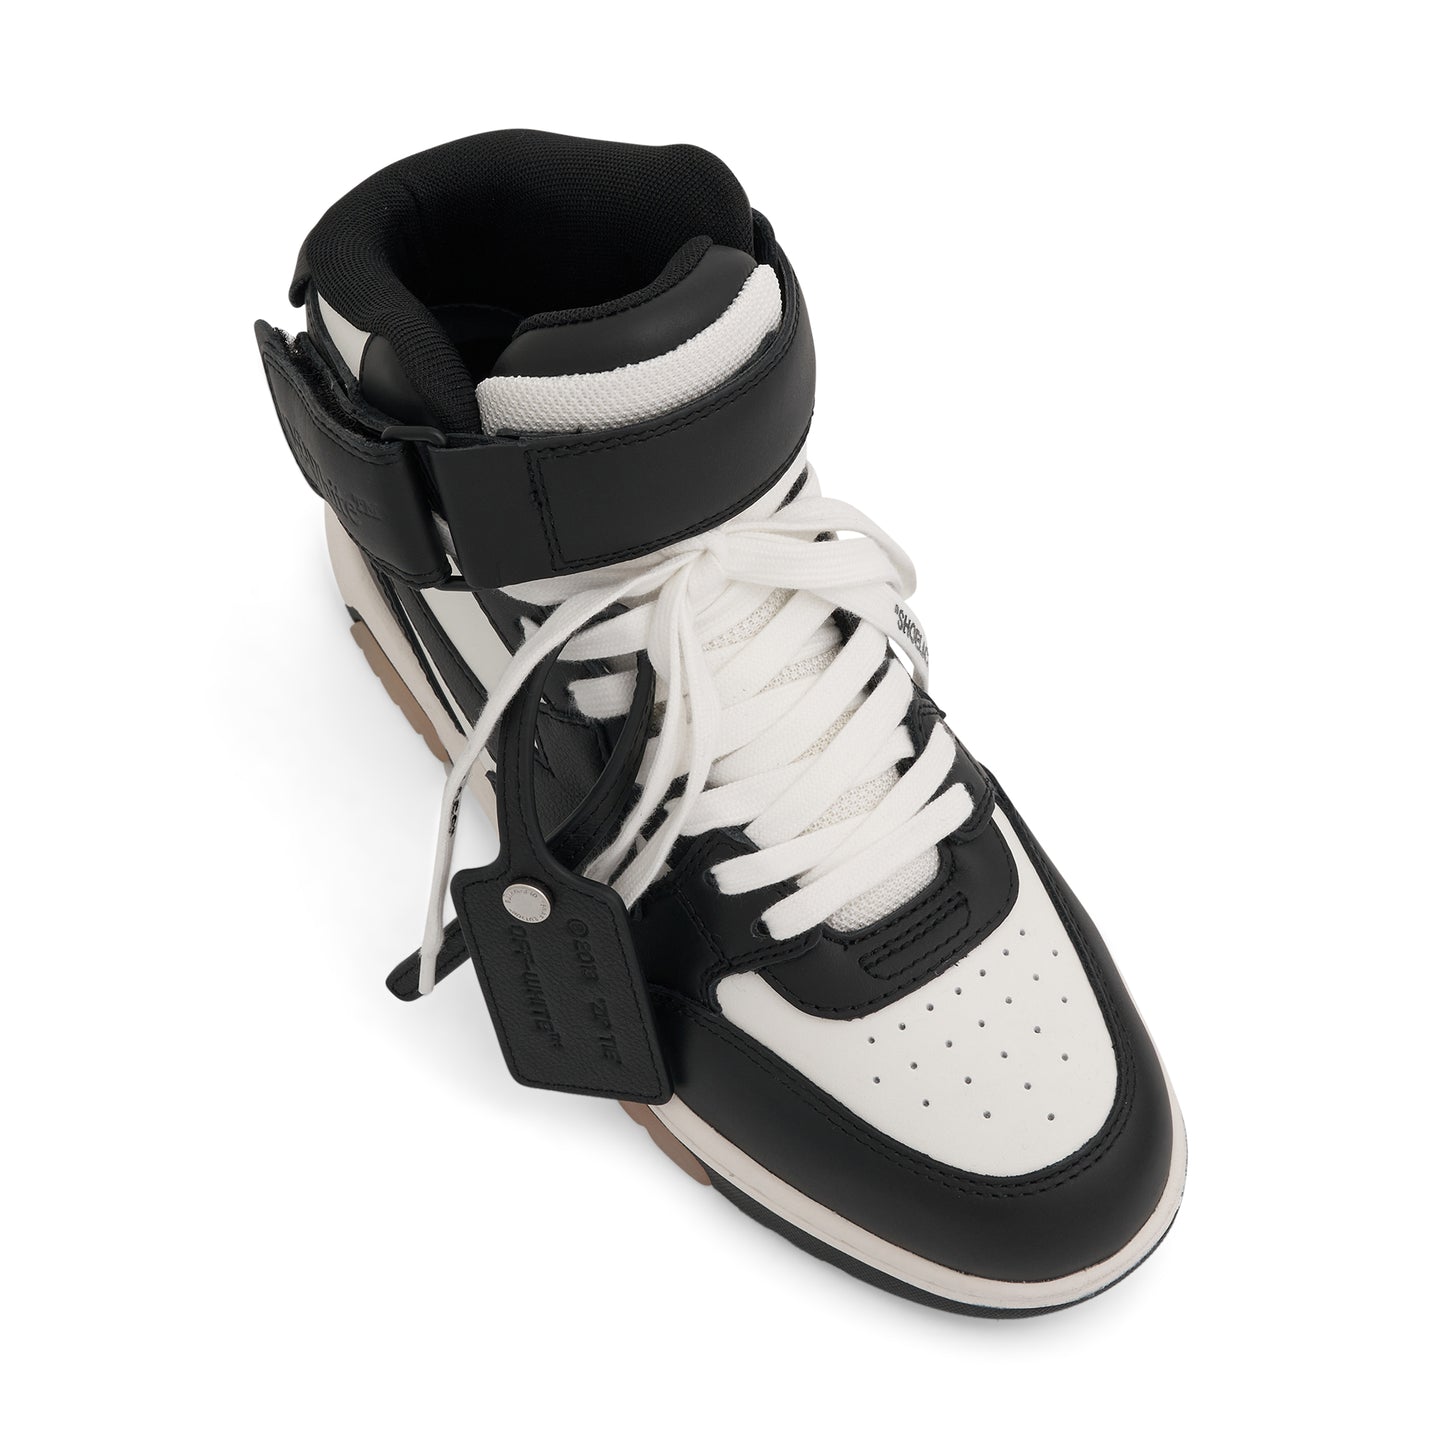 Out Of Office Mid Top Leather Sneakers in Black/White